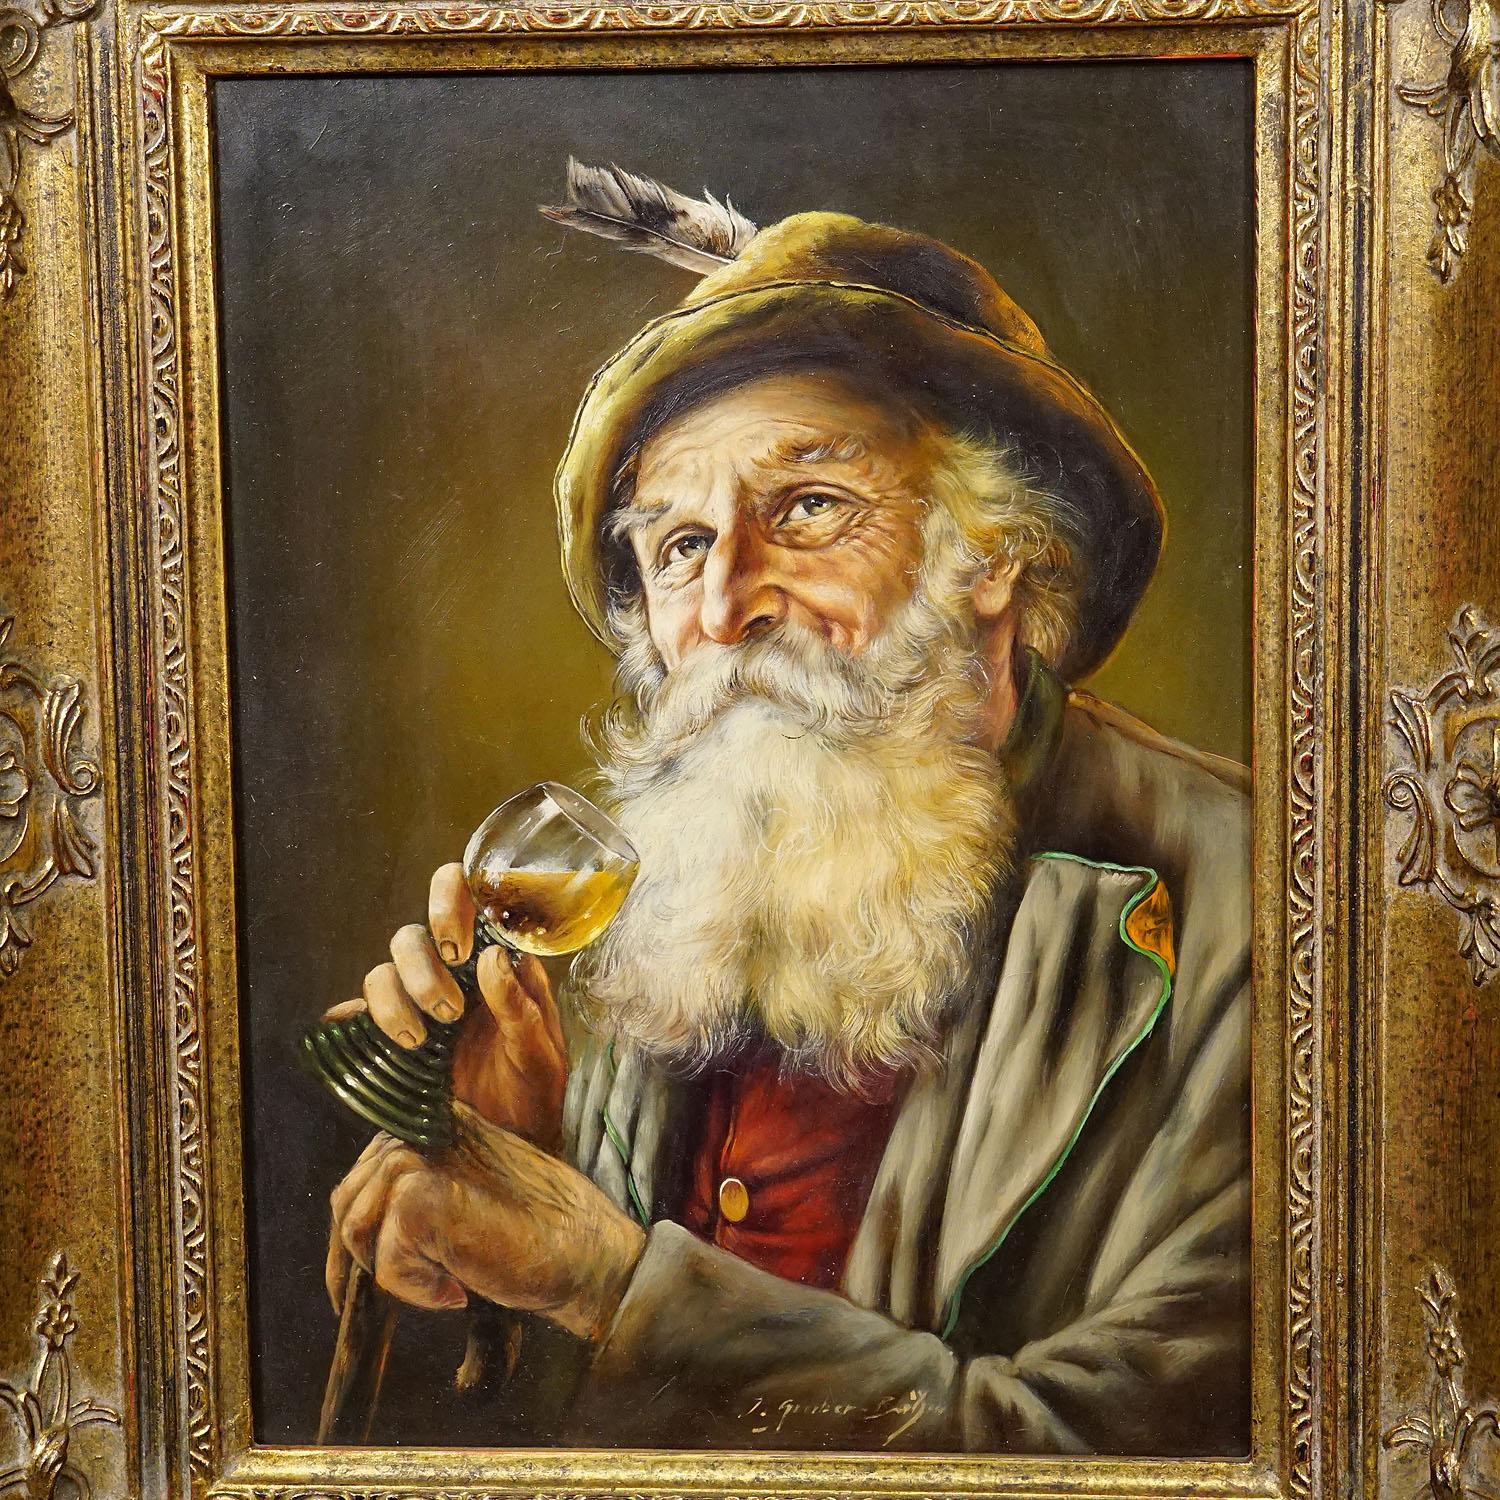 German J. Gruber - Portrait of a Bavarian Folksy Man with Wine Glass, Oil on Wood For Sale